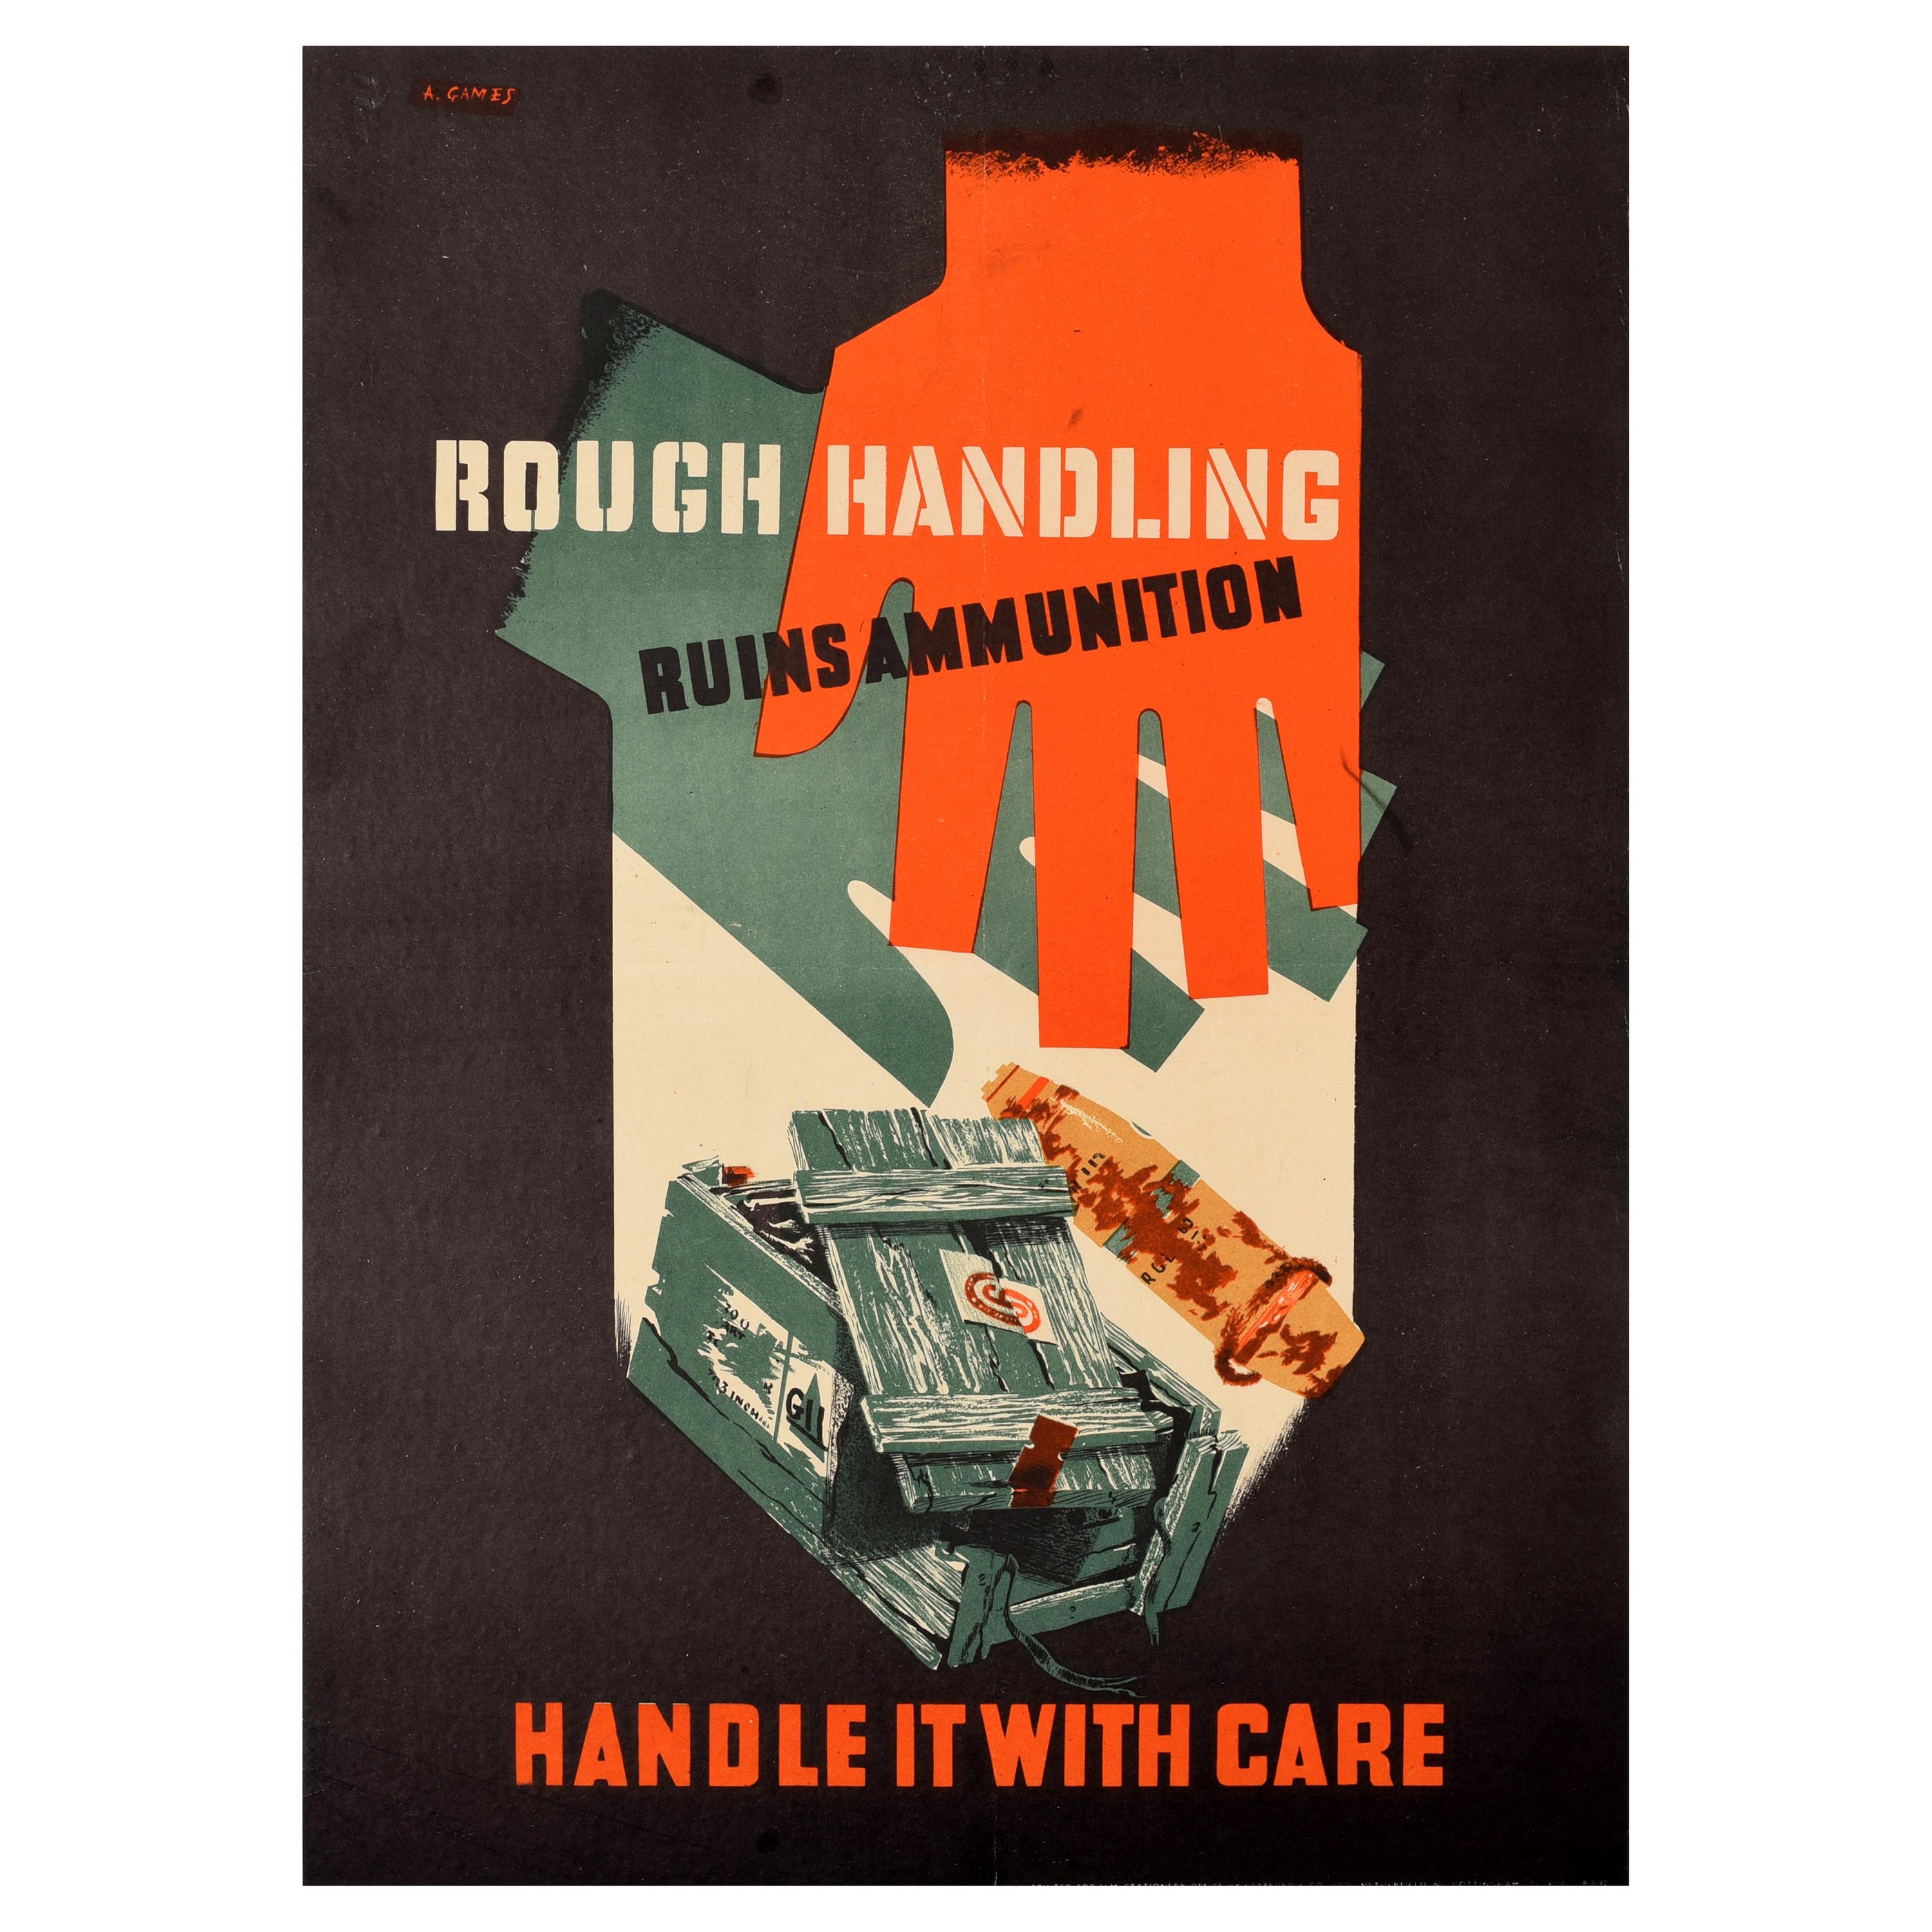 Original Vintage WWII Poster Rough Handling Ruins Ammunition Safety Care Warning (anglais seulement)